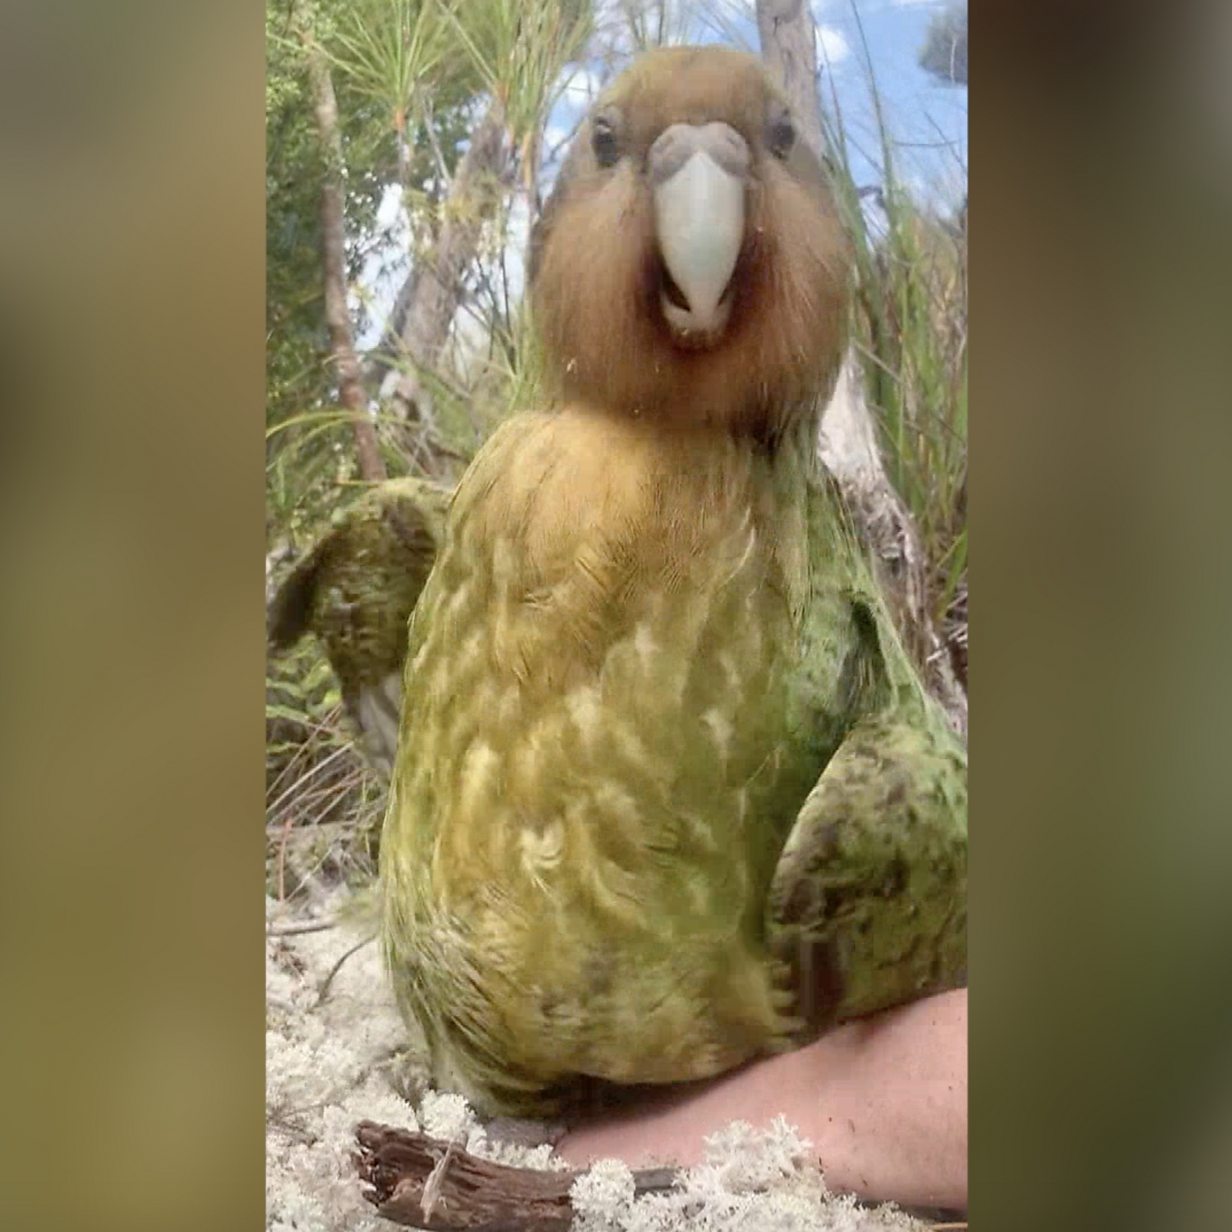 New Zealand crowns chubby cute parrot bird of the year - BBC News